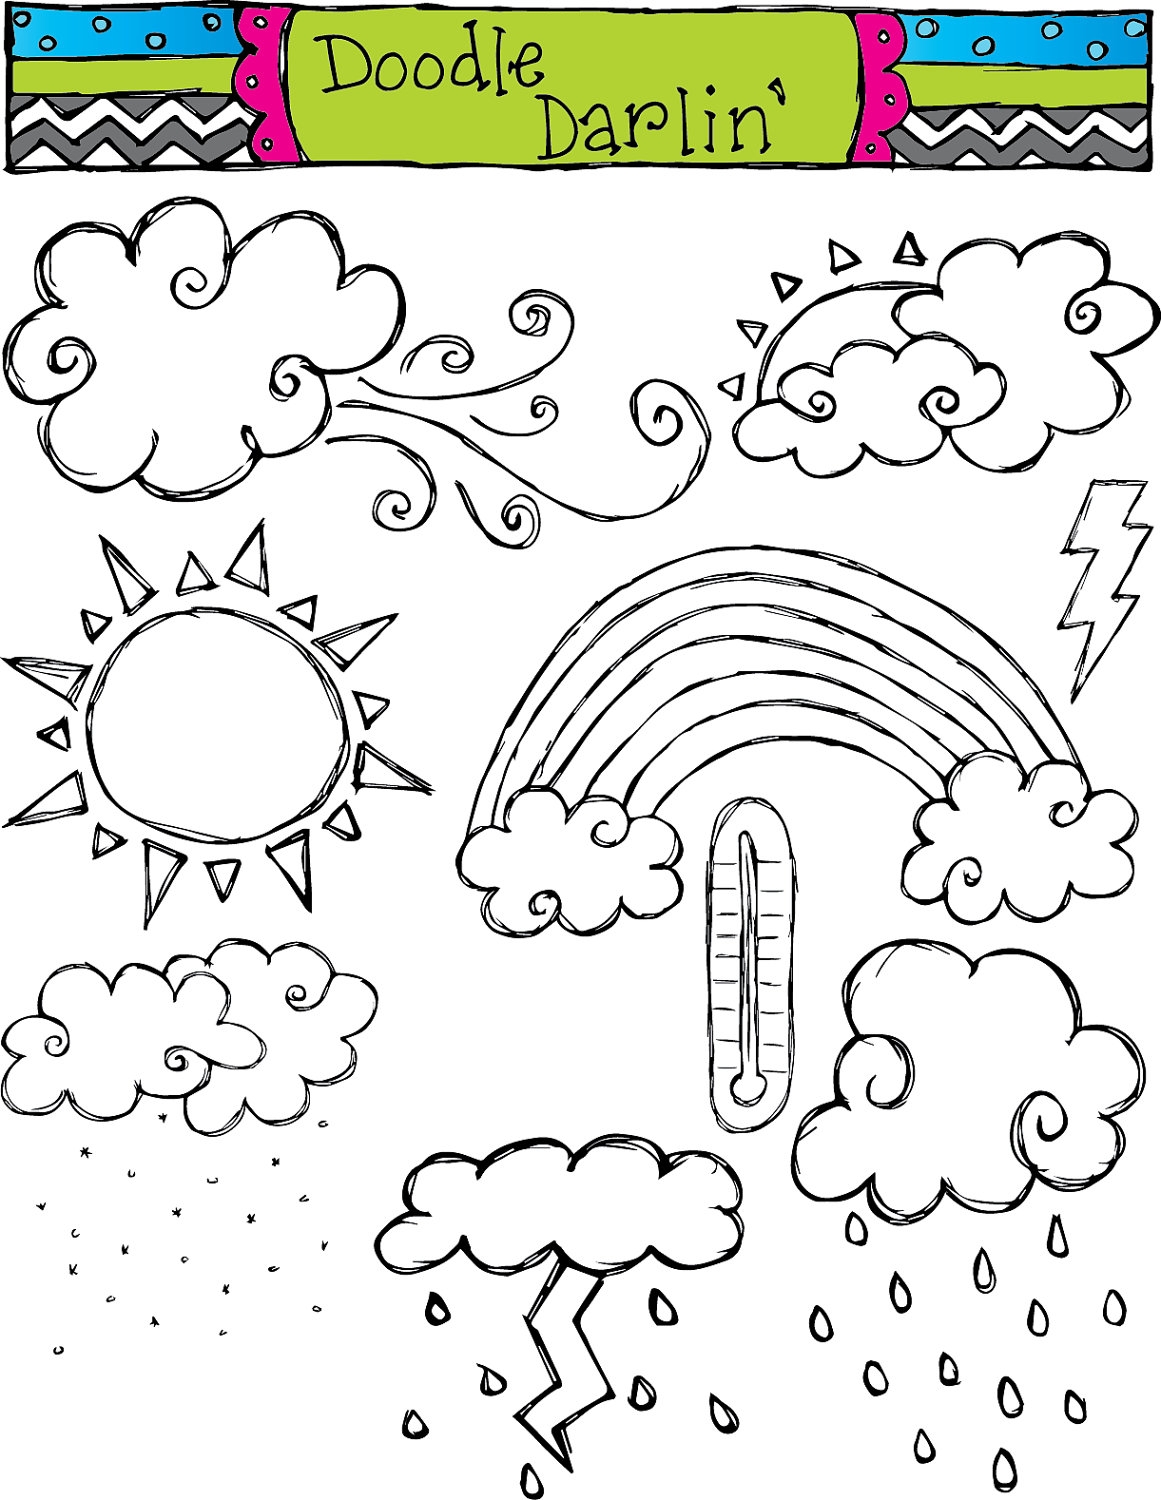 Free black and white weather clipart